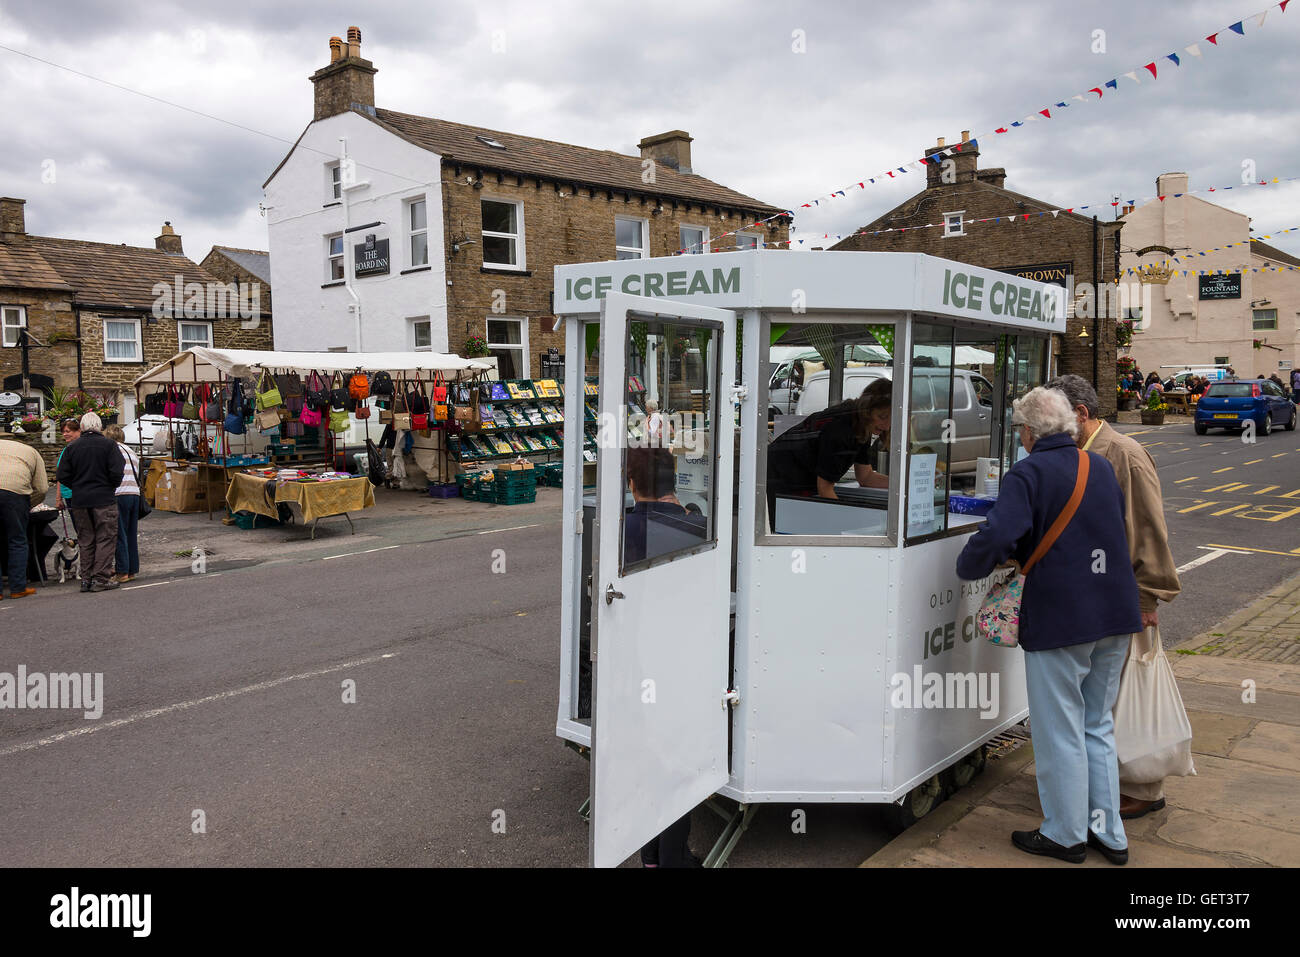 Market Day in Hawes with Ice Cream Caravan, Stalls and Three Public Houses Yorkshire Dales England United Kingdom UK Stock Photo